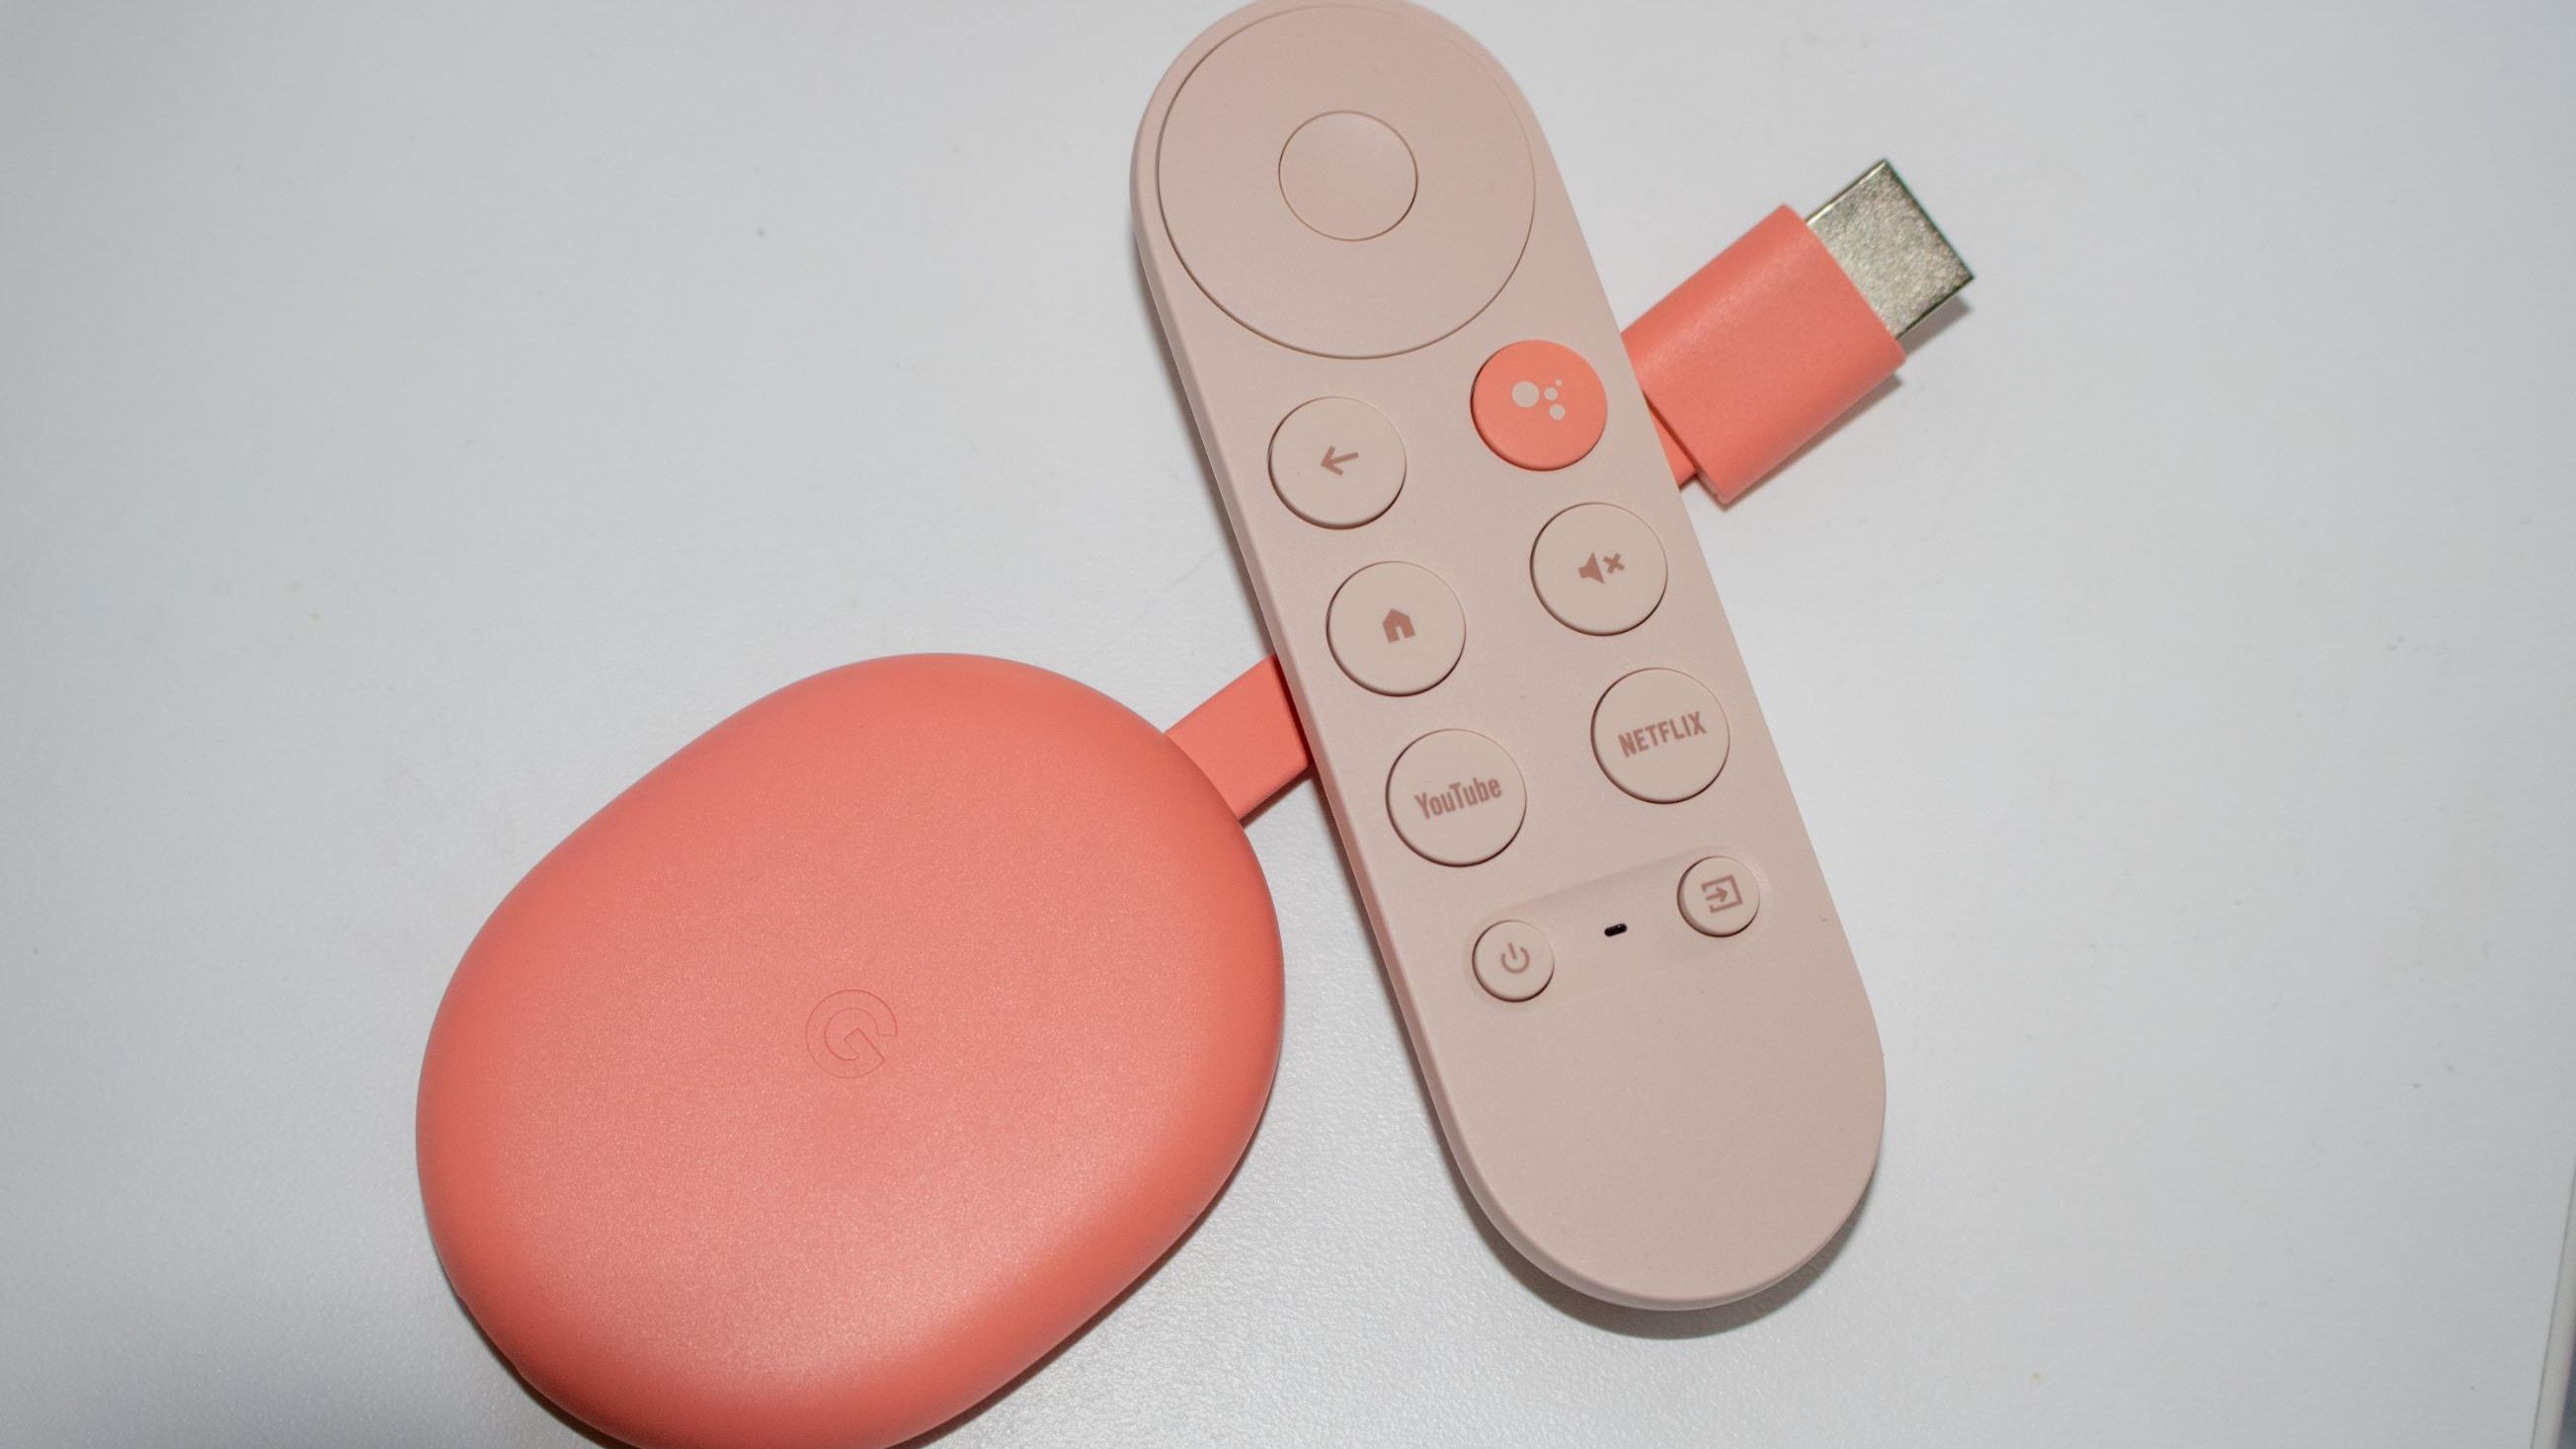 Google Chromecast with Google TV review: The best streaming dongle